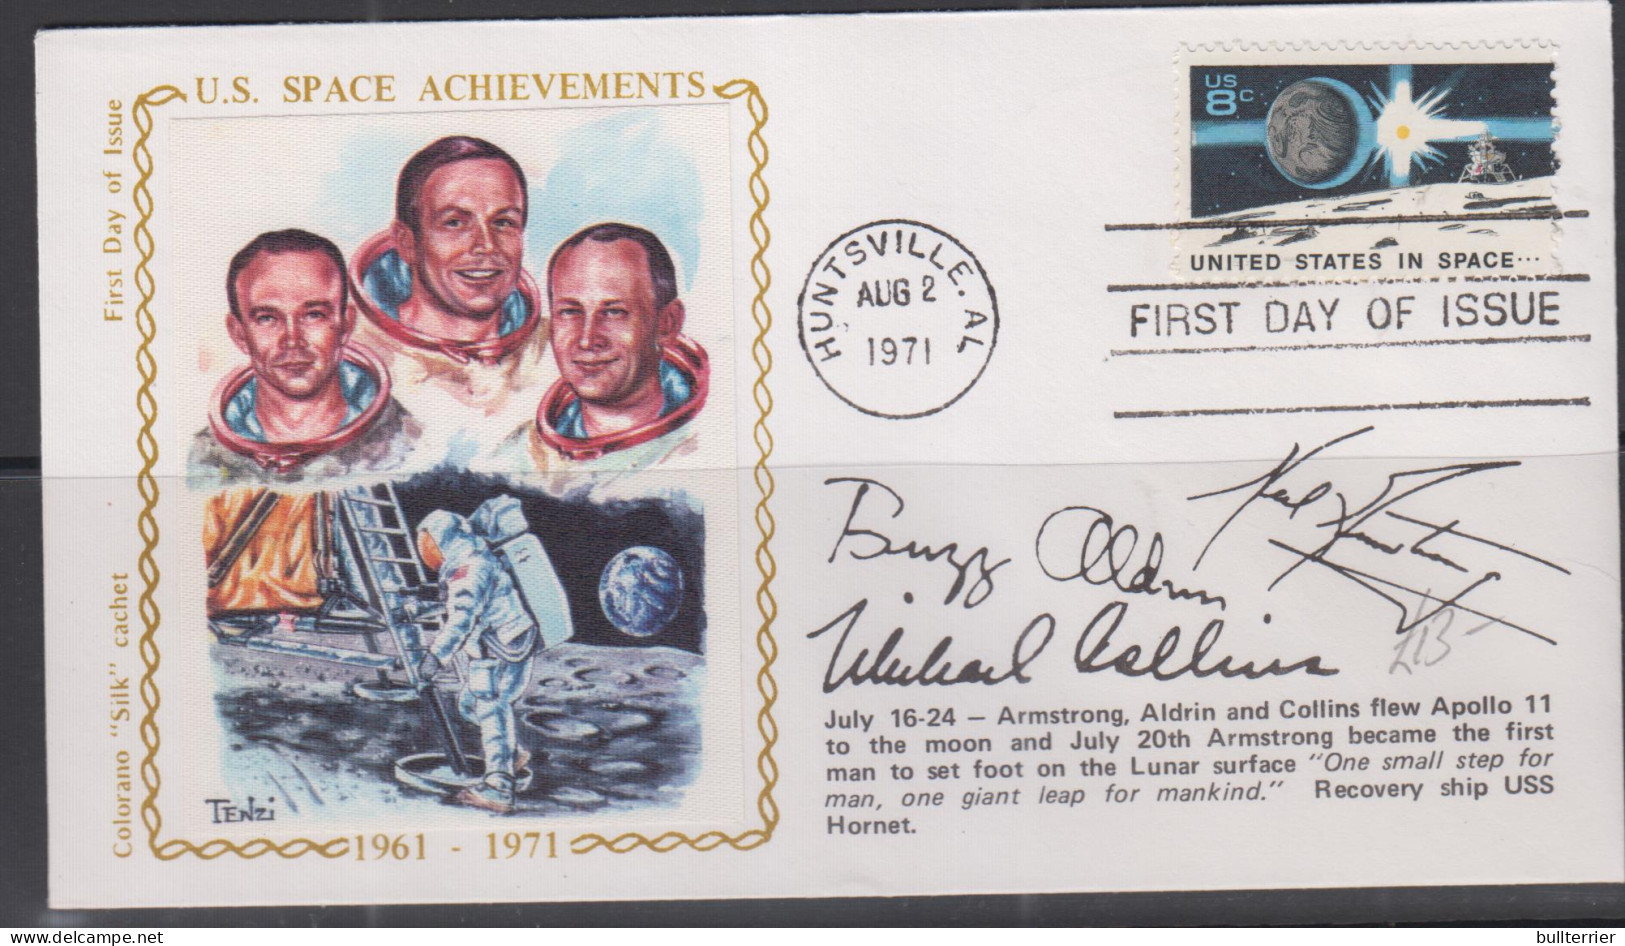 USA - 1979 - MOON LANDING SILK FIRST DAY COVER WITH AUTOPEN SIGNATURES ARMSTRONG, ALDRIN & COLLINS - USA